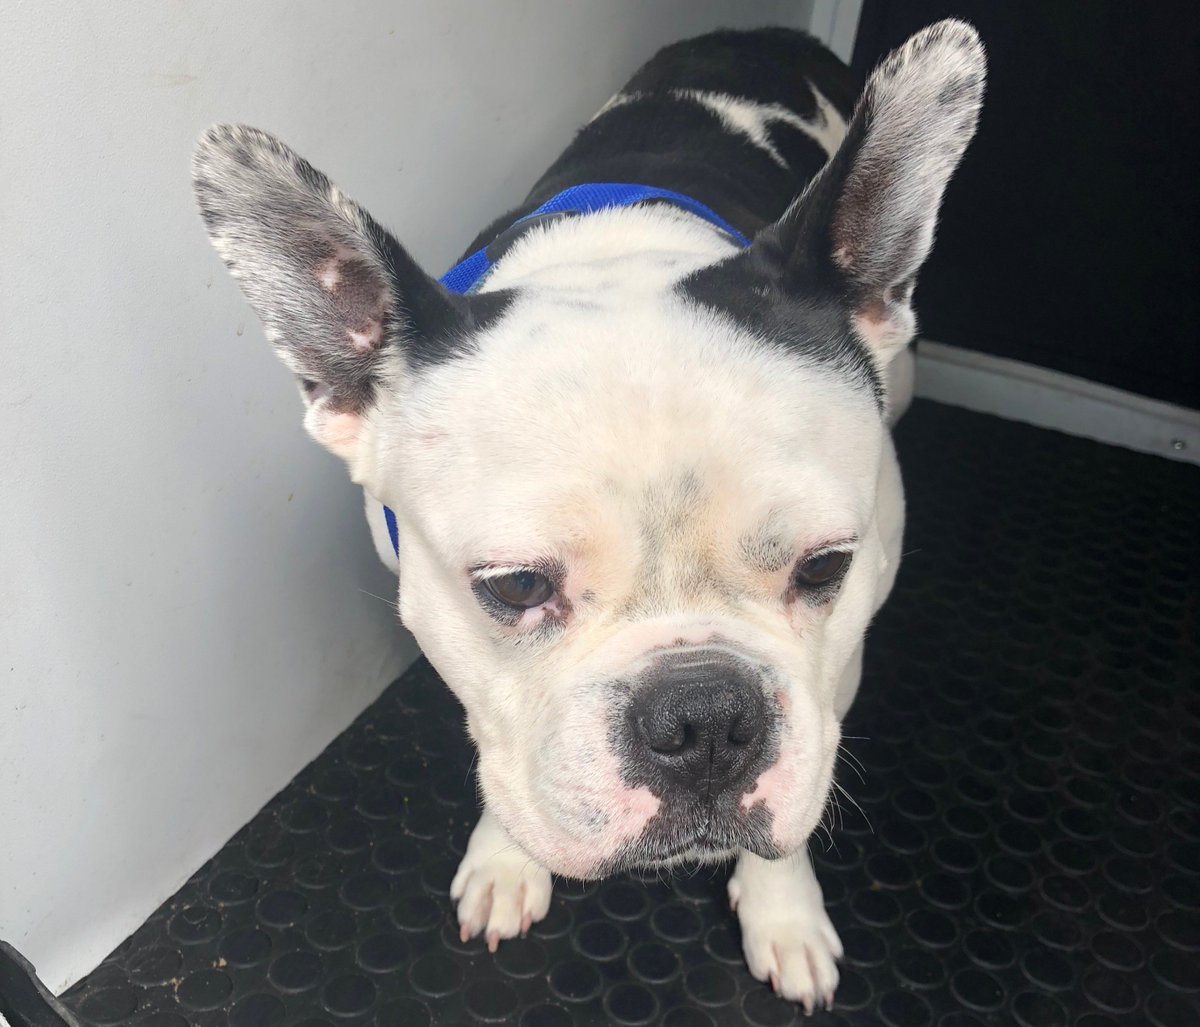 ❗PLEASE RT❗ We have picked up a stray dog from the Moorclose area of Workington (found near the Spar) and are trying to trace her owner. She's a French Bulldog about seven years old. If you know who owns her please contact Whinmill Farm Kennels, High Harrington on 01946 832002.